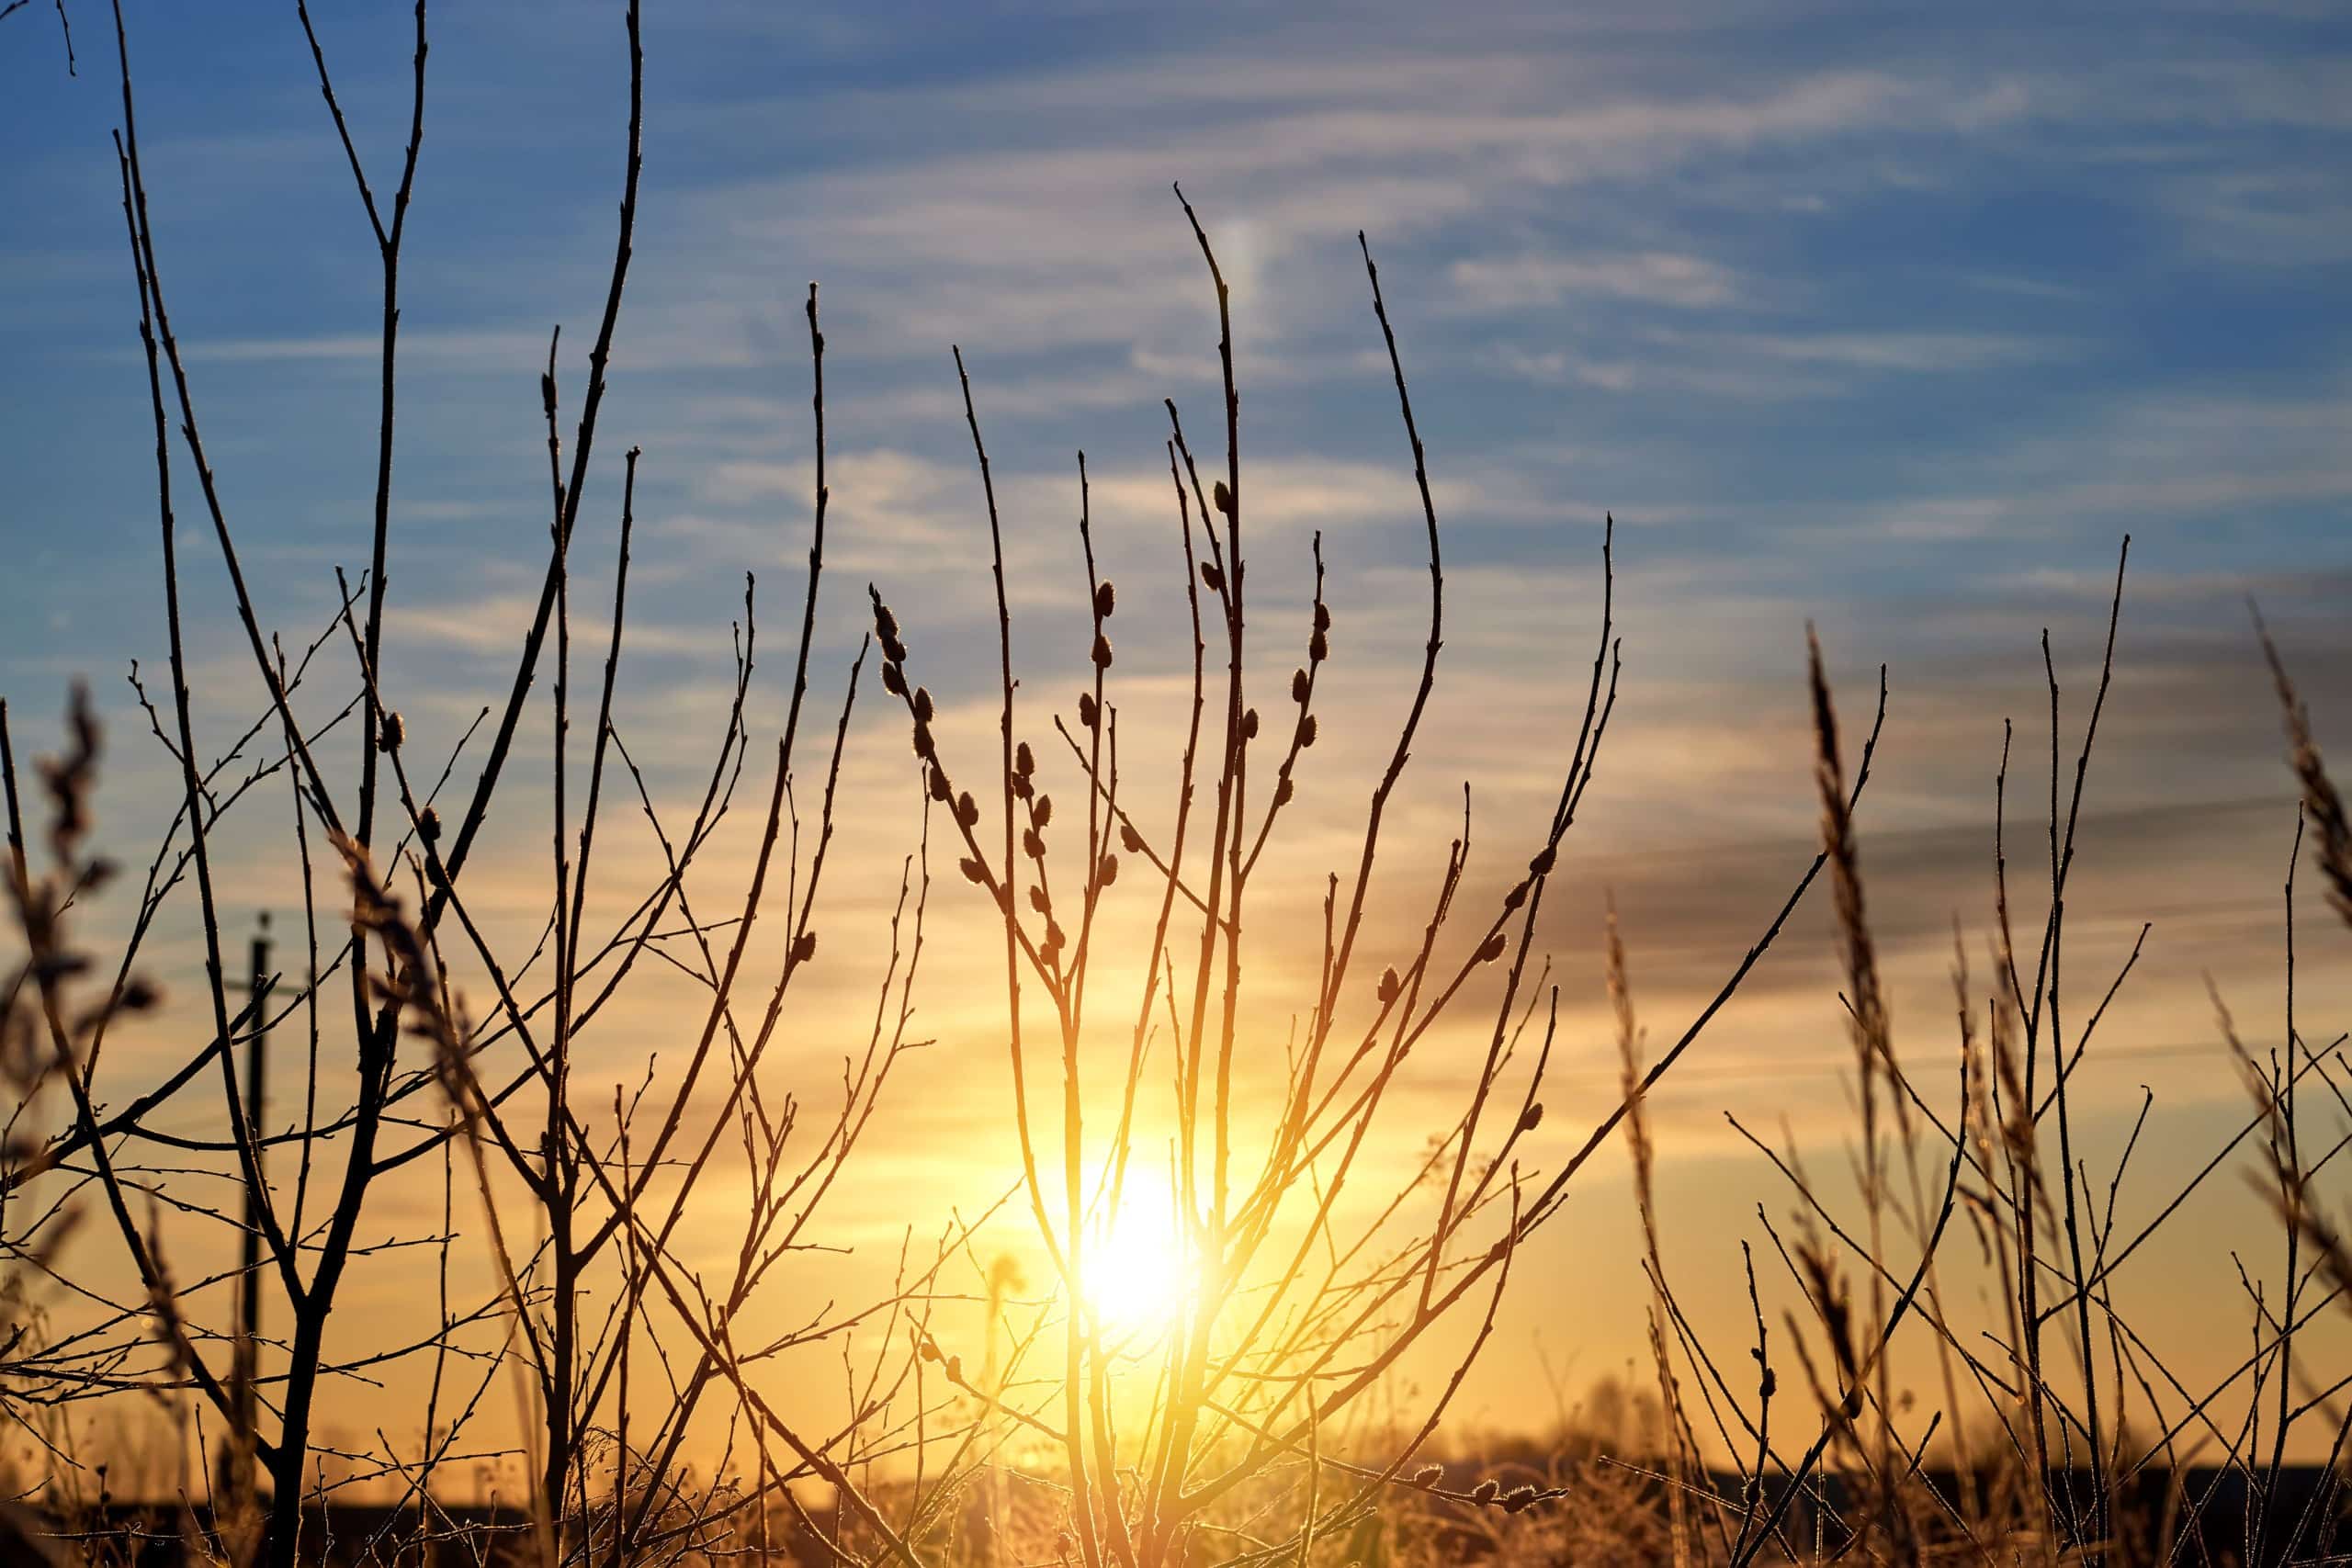 Willow branches at beautiful spring sunset.